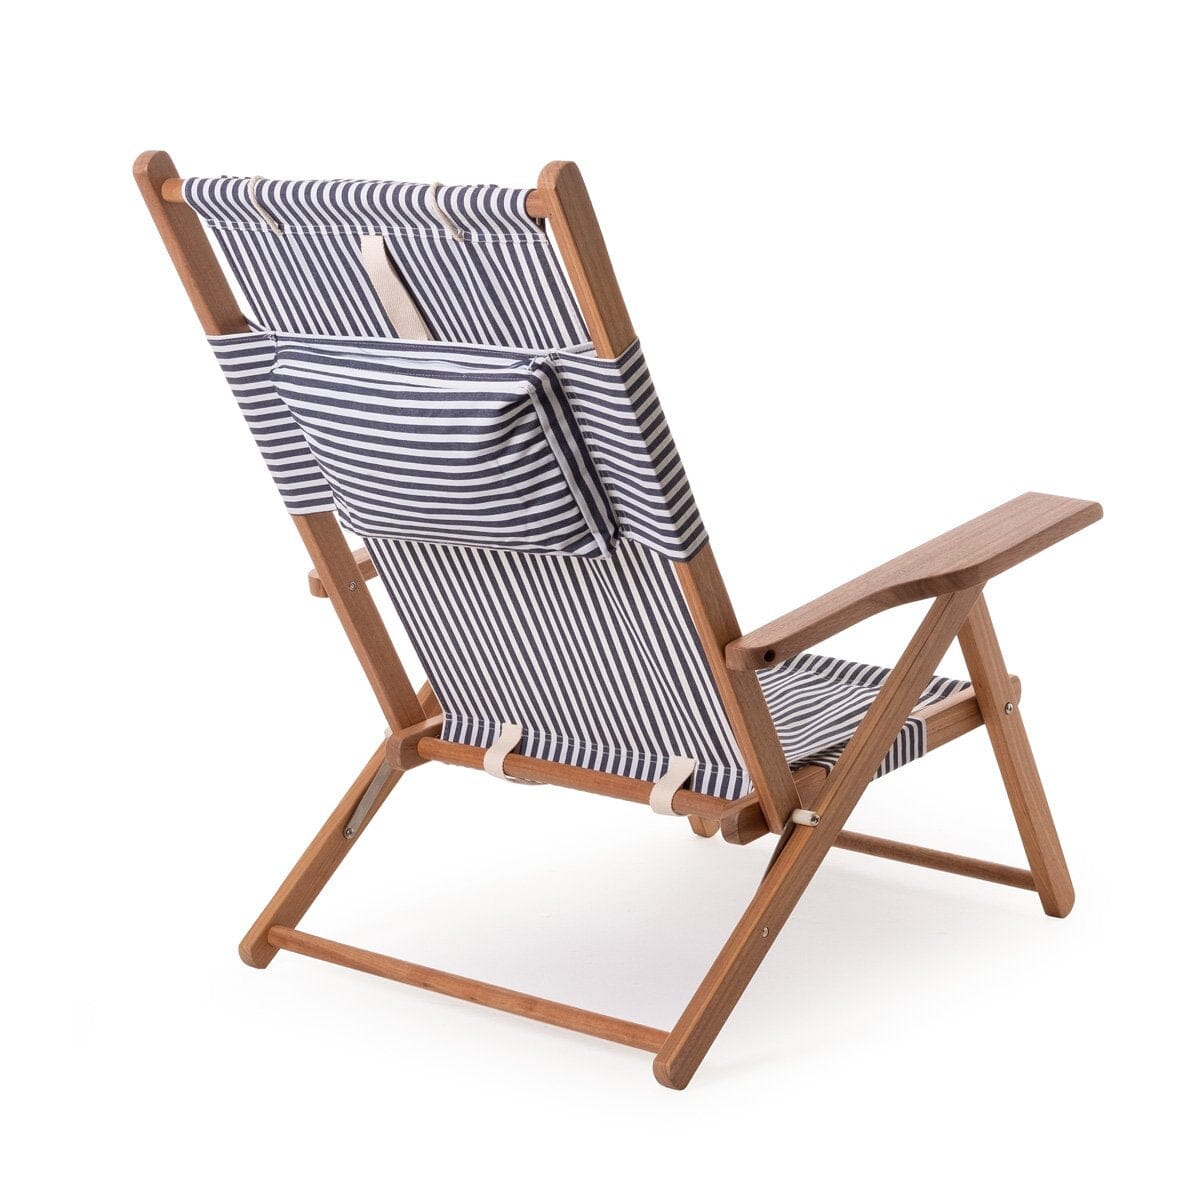 The Tommy Chair - Lauren's Navy Stripe Tommy Chair Business & Pleasure Co 